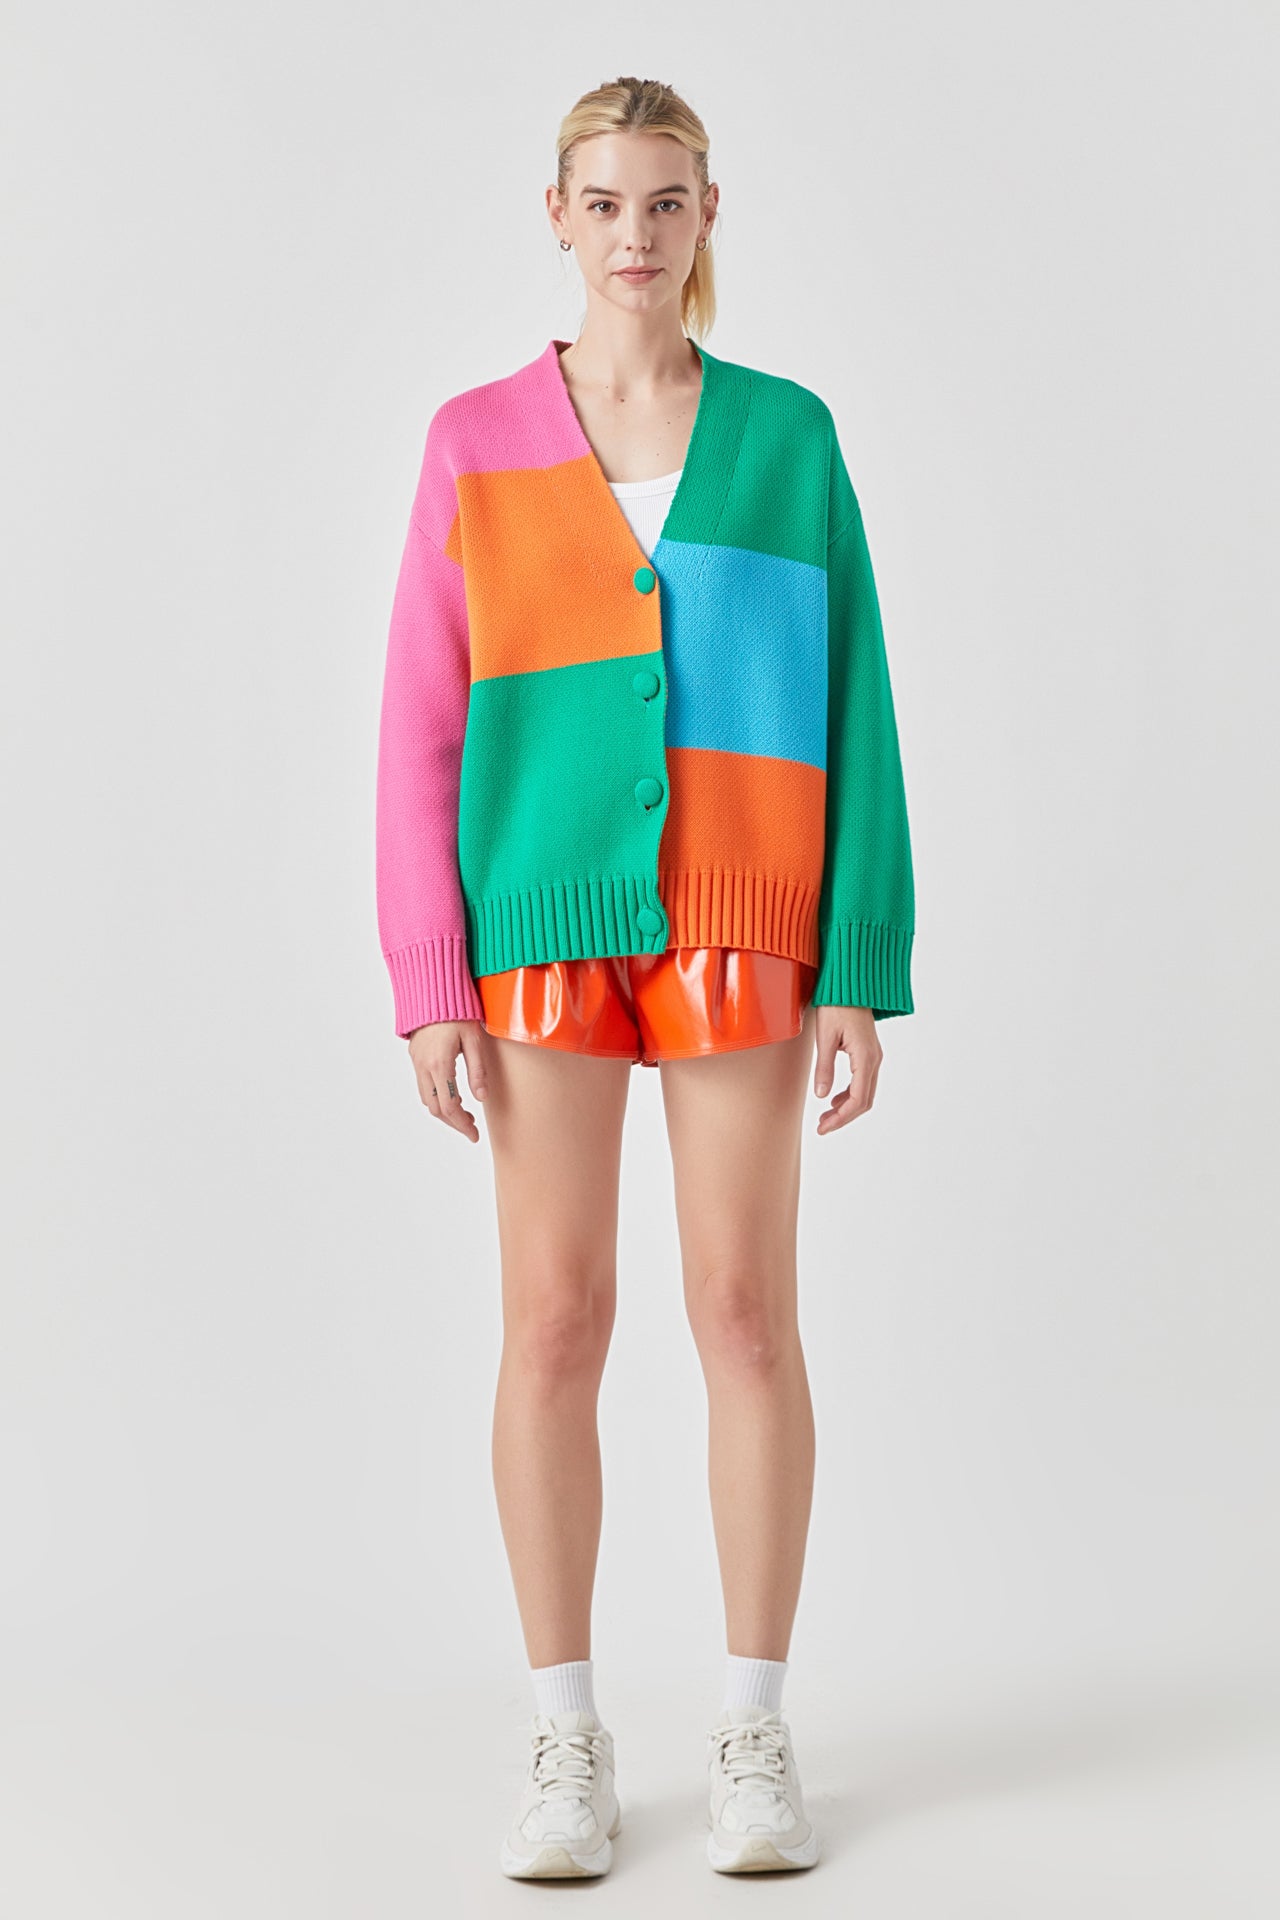 GREY LAB - Abstract Colorblock Cardigan - CARDIGANS available at Objectrare